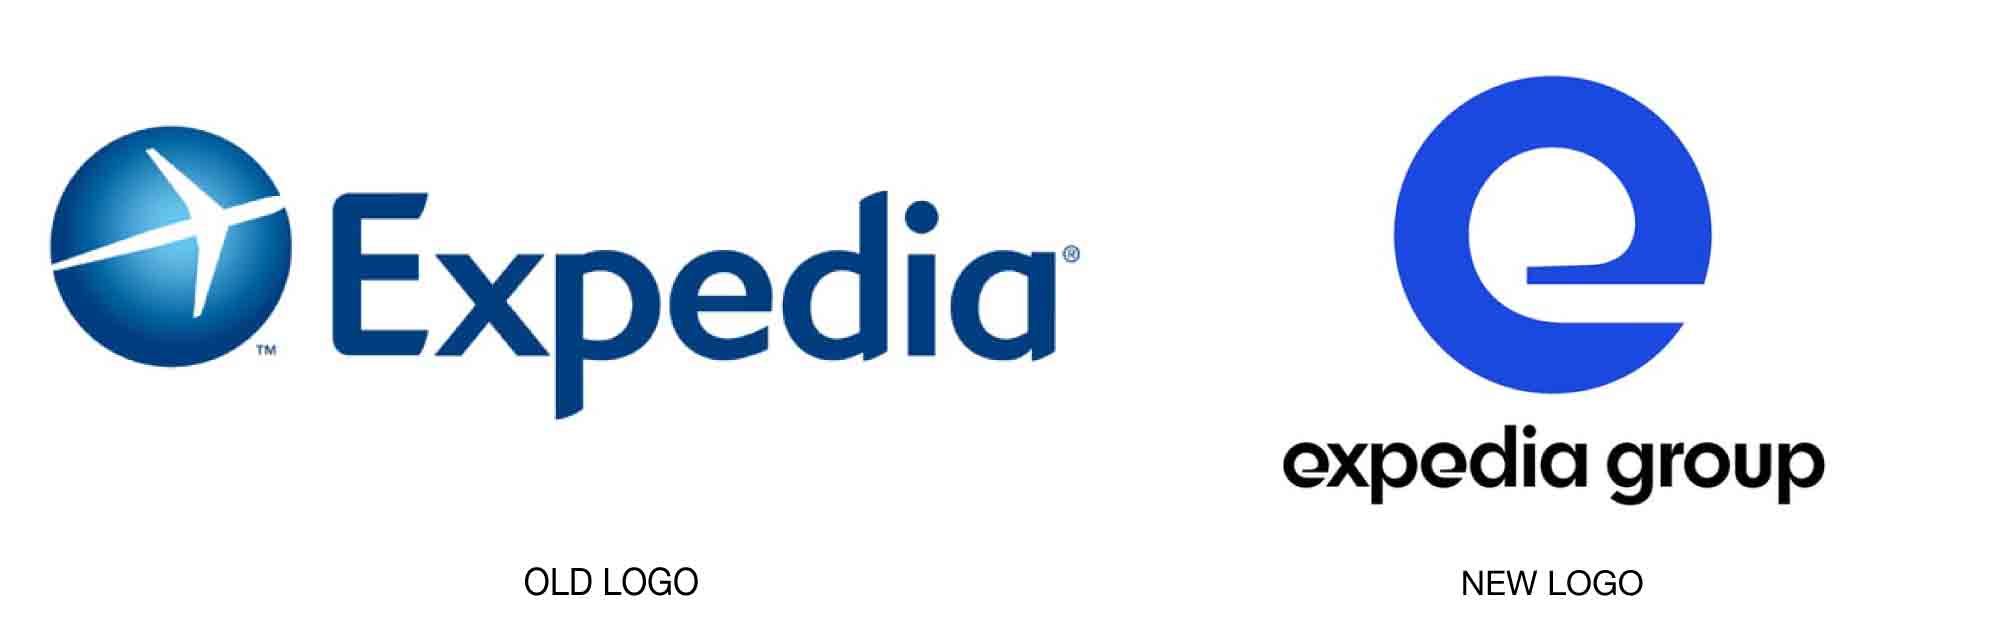 Expedia New Logo - Expedia Repositions | Articles | LogoLounge